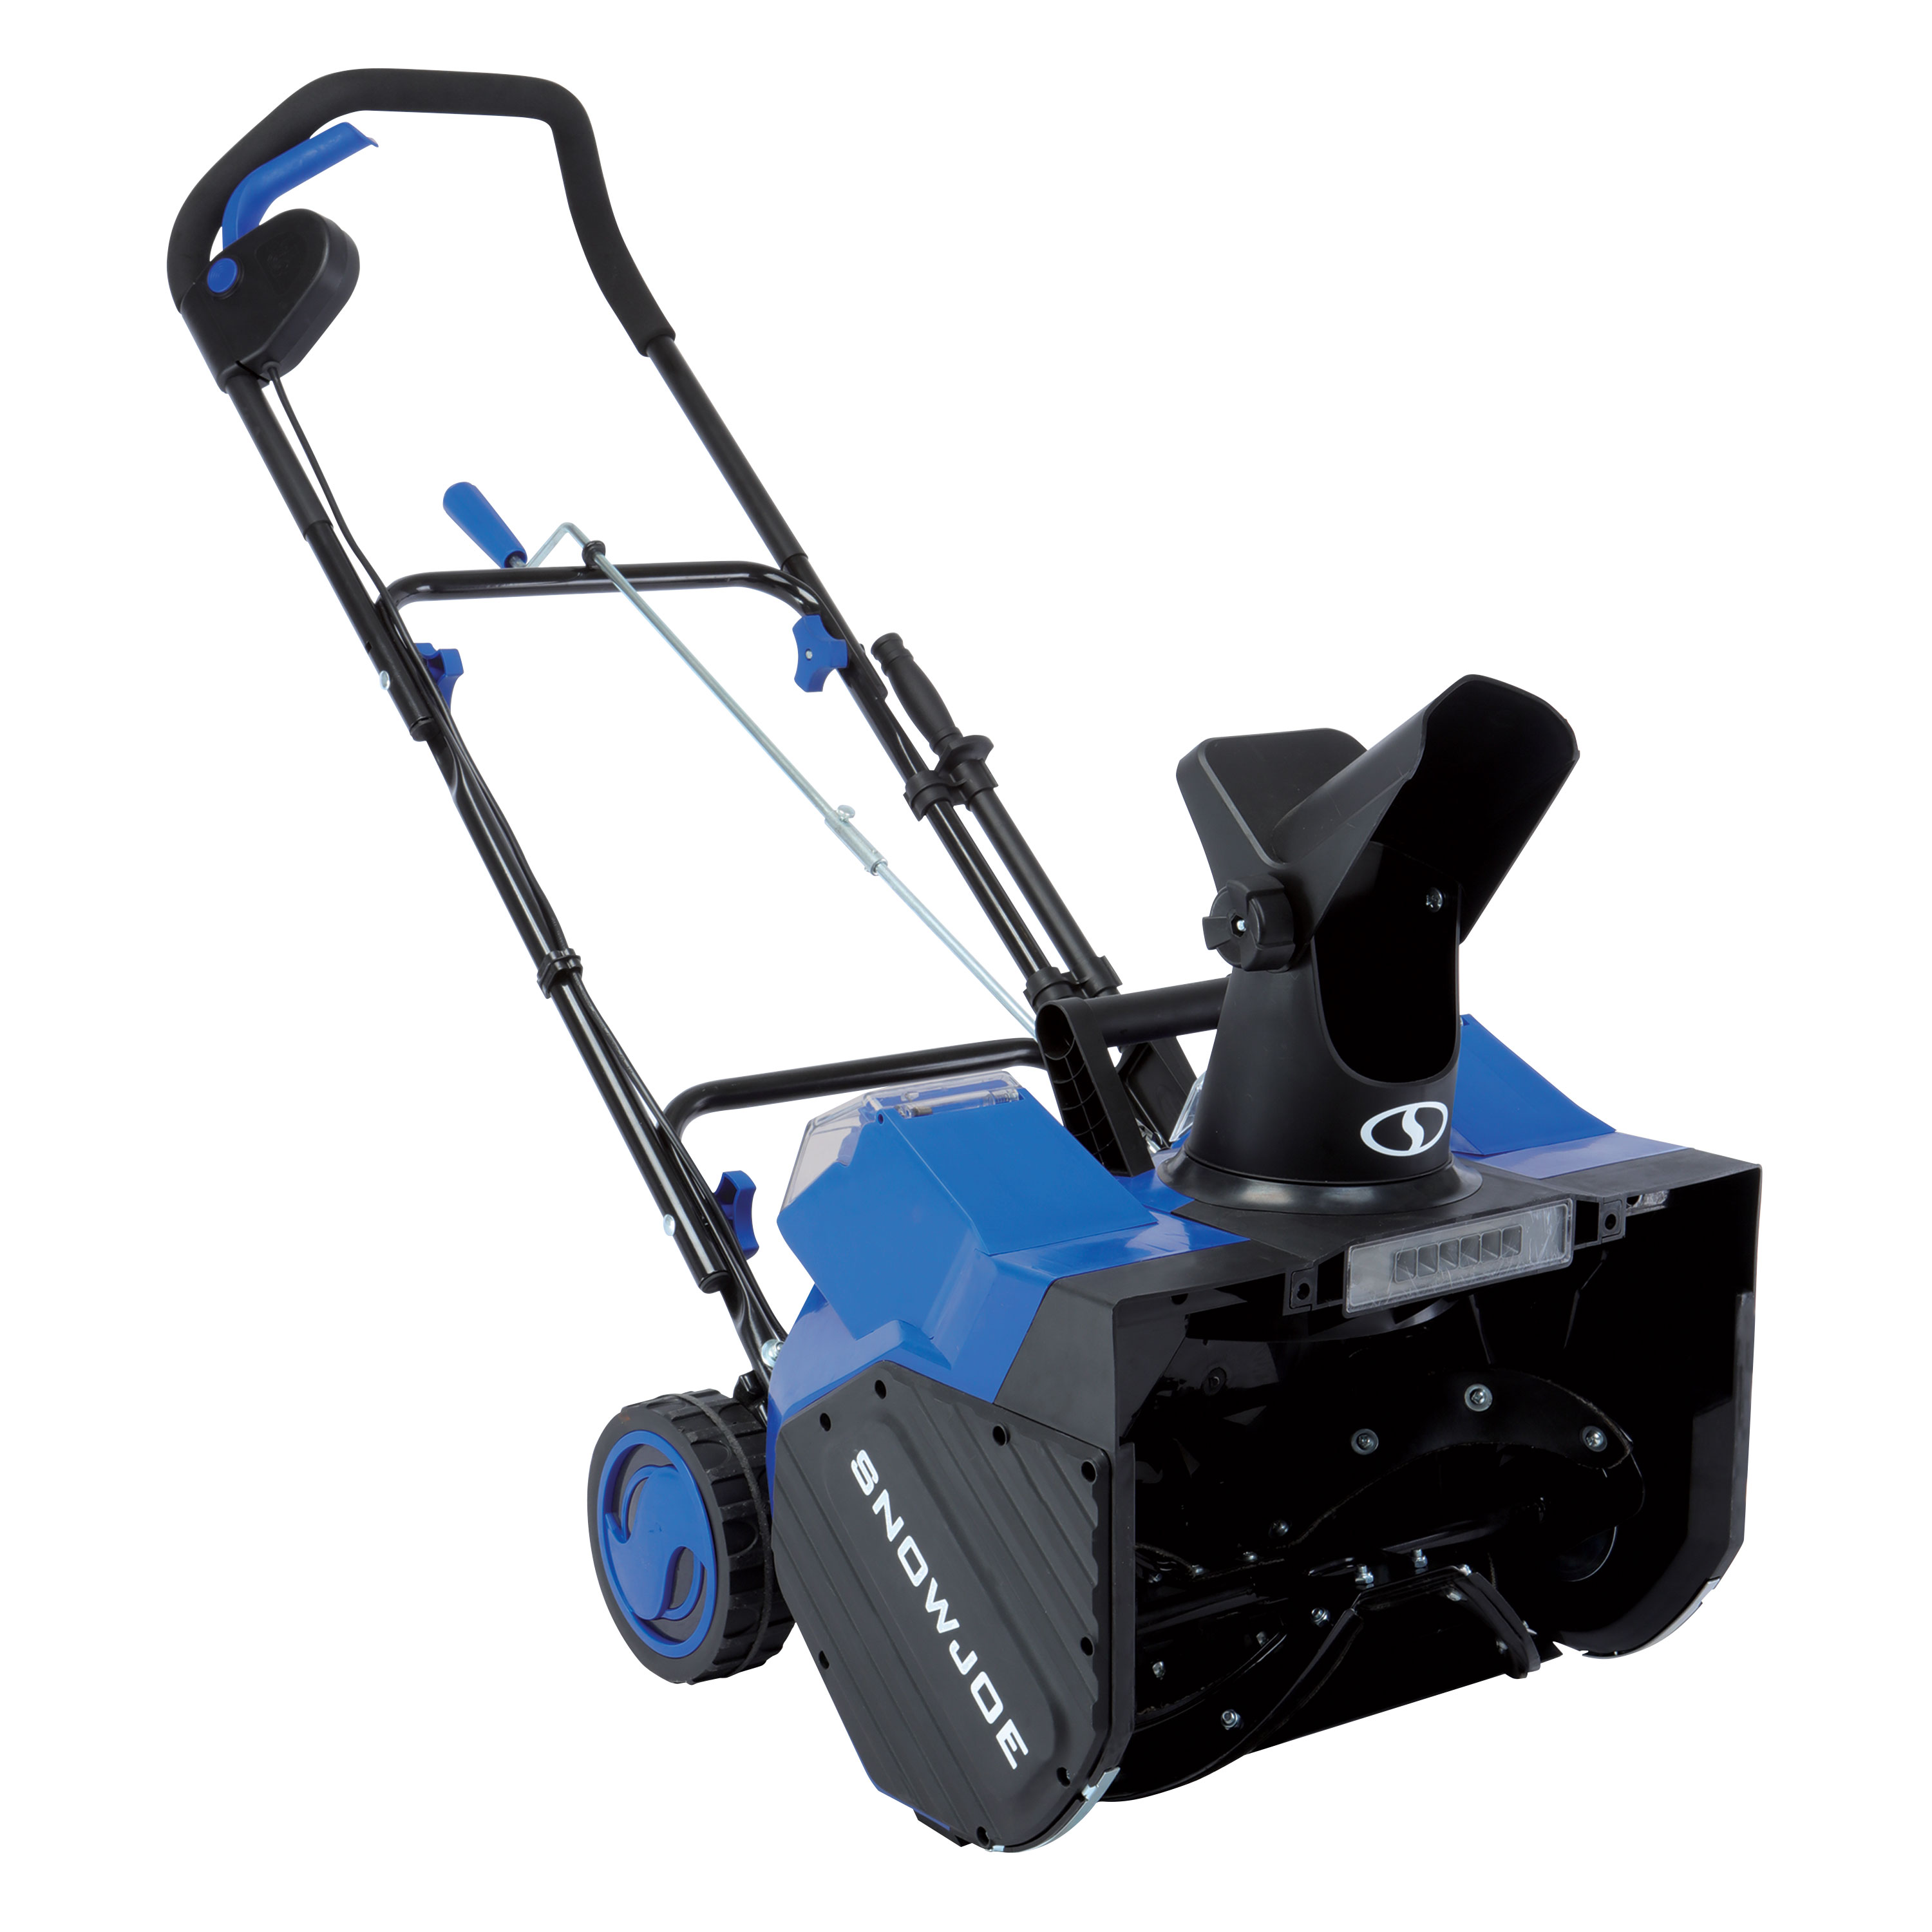 Snow Joe 48-Volt IONMAX Cordless Snow Blower Kit | 18-Inch | W/ 2 x 4.0-Ah Batteries and Charger